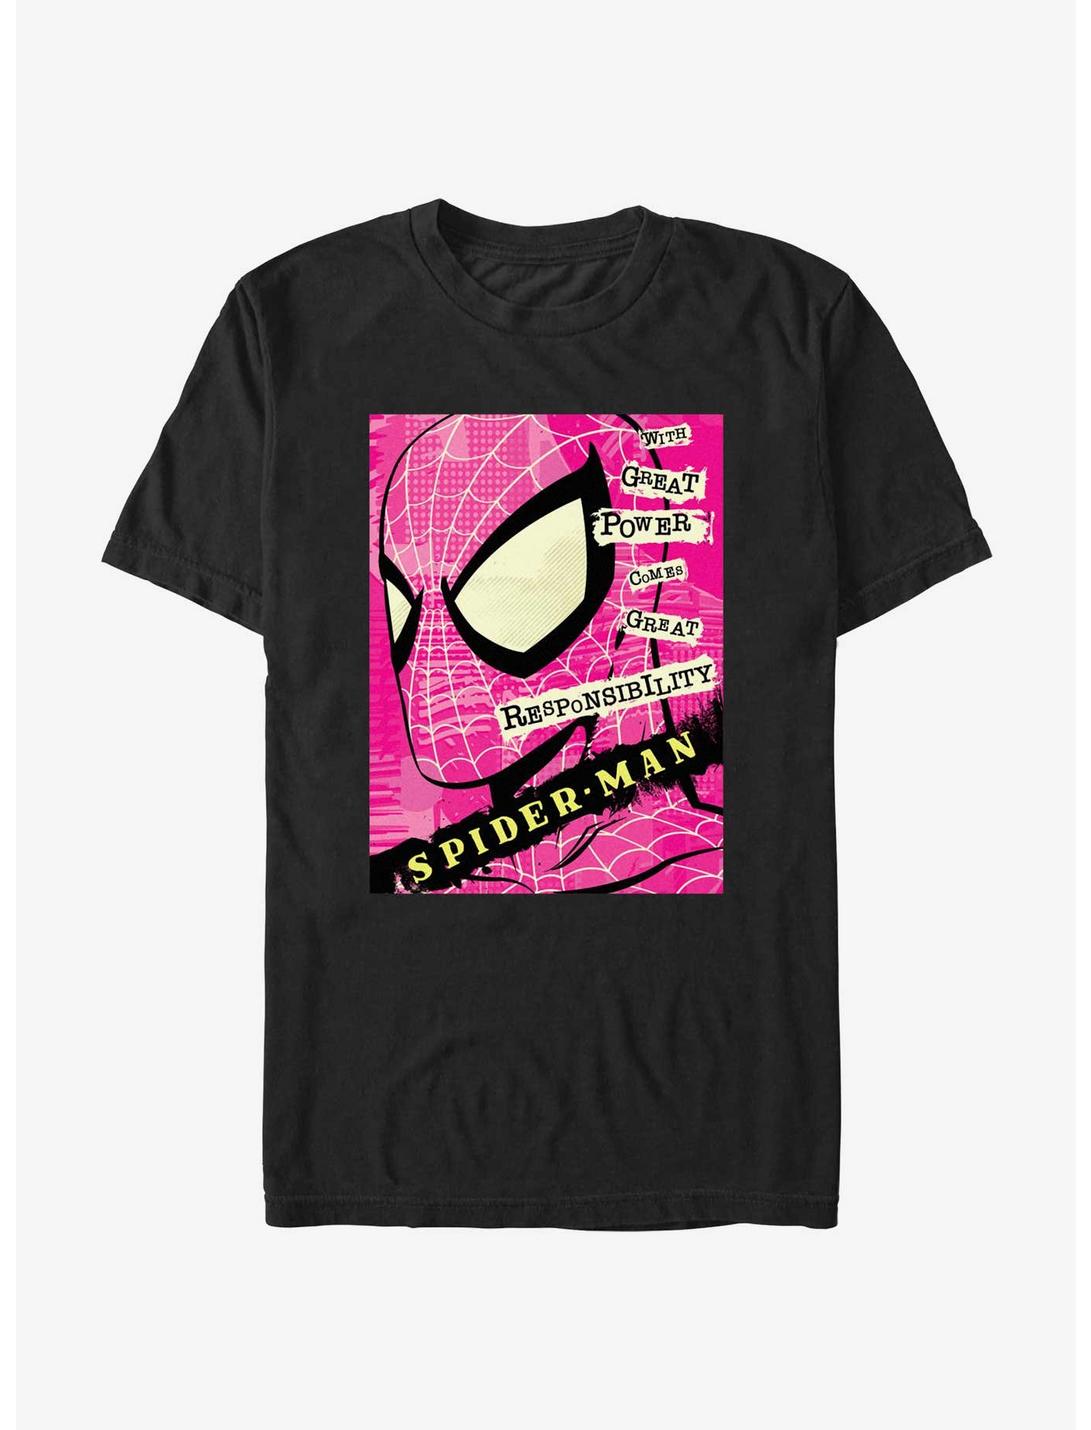 Marvel Spider-Man Power And Responsibility Quote T-Shirt, BLACK, hi-res